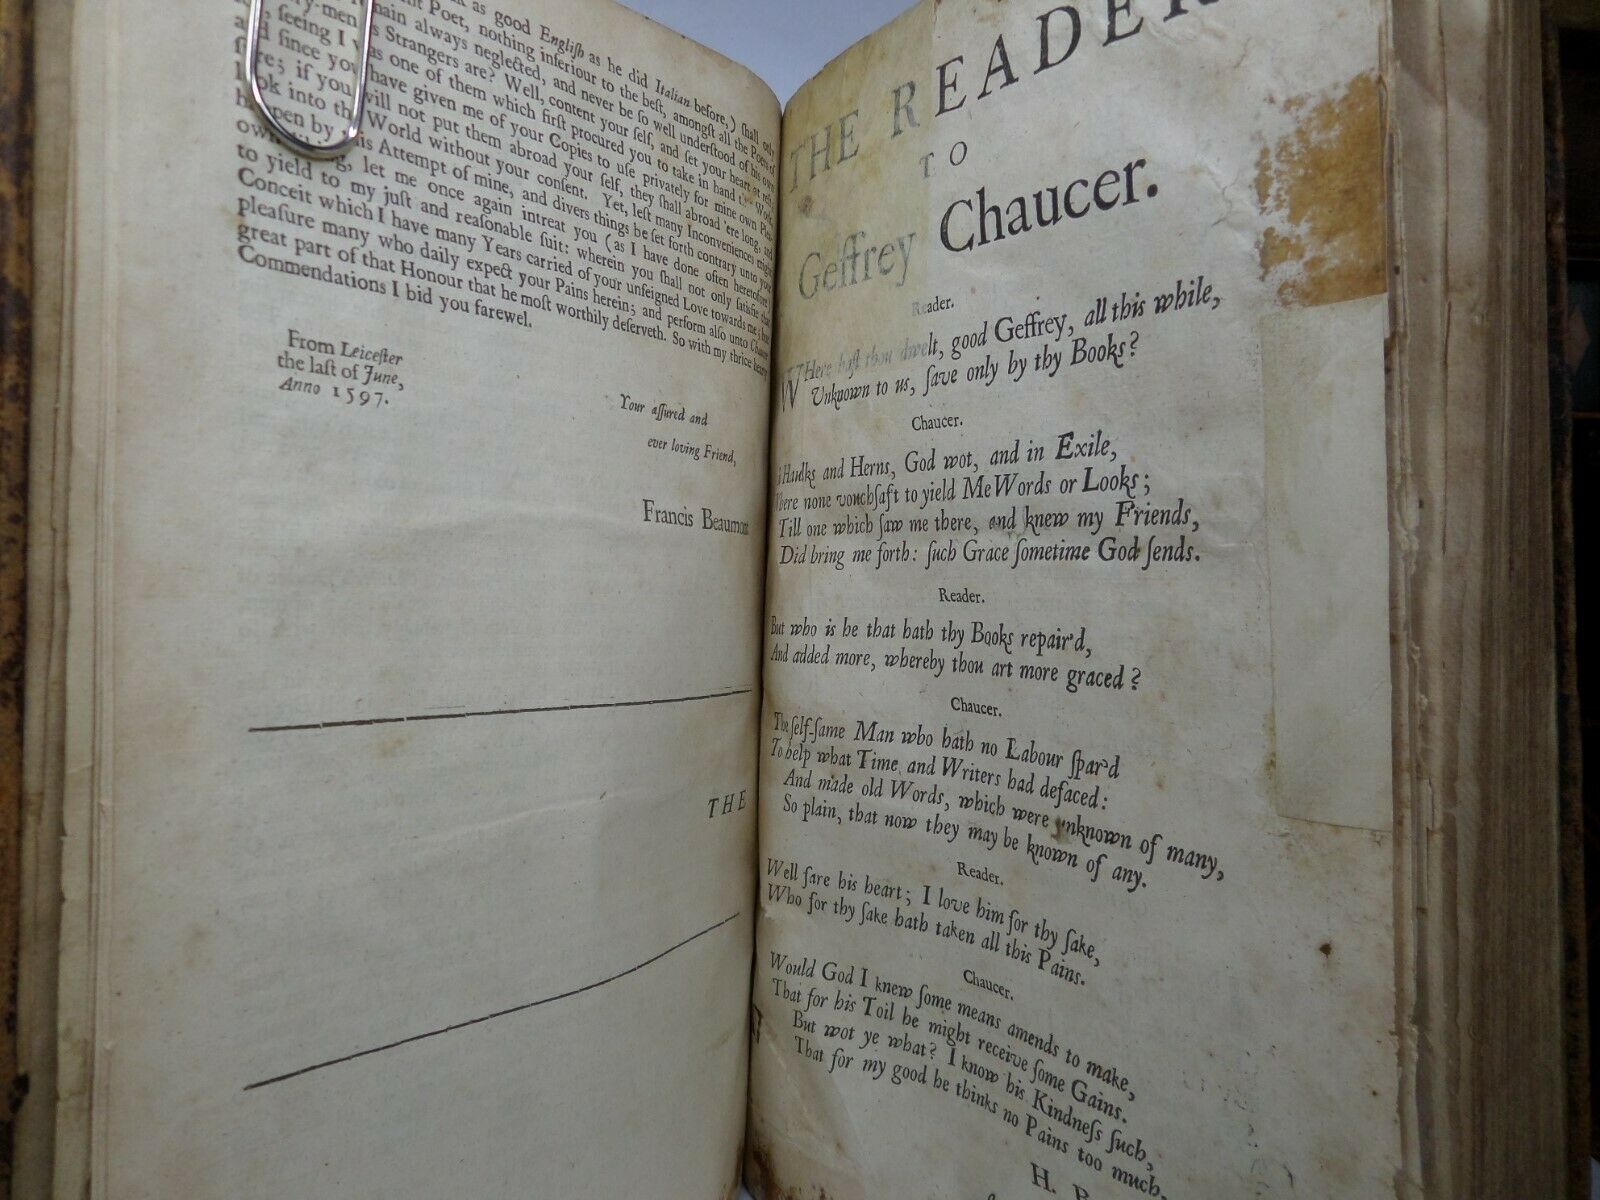 THE WORKS OF JEFFREY CHAUCER 1687 Edited by Thomas Speght